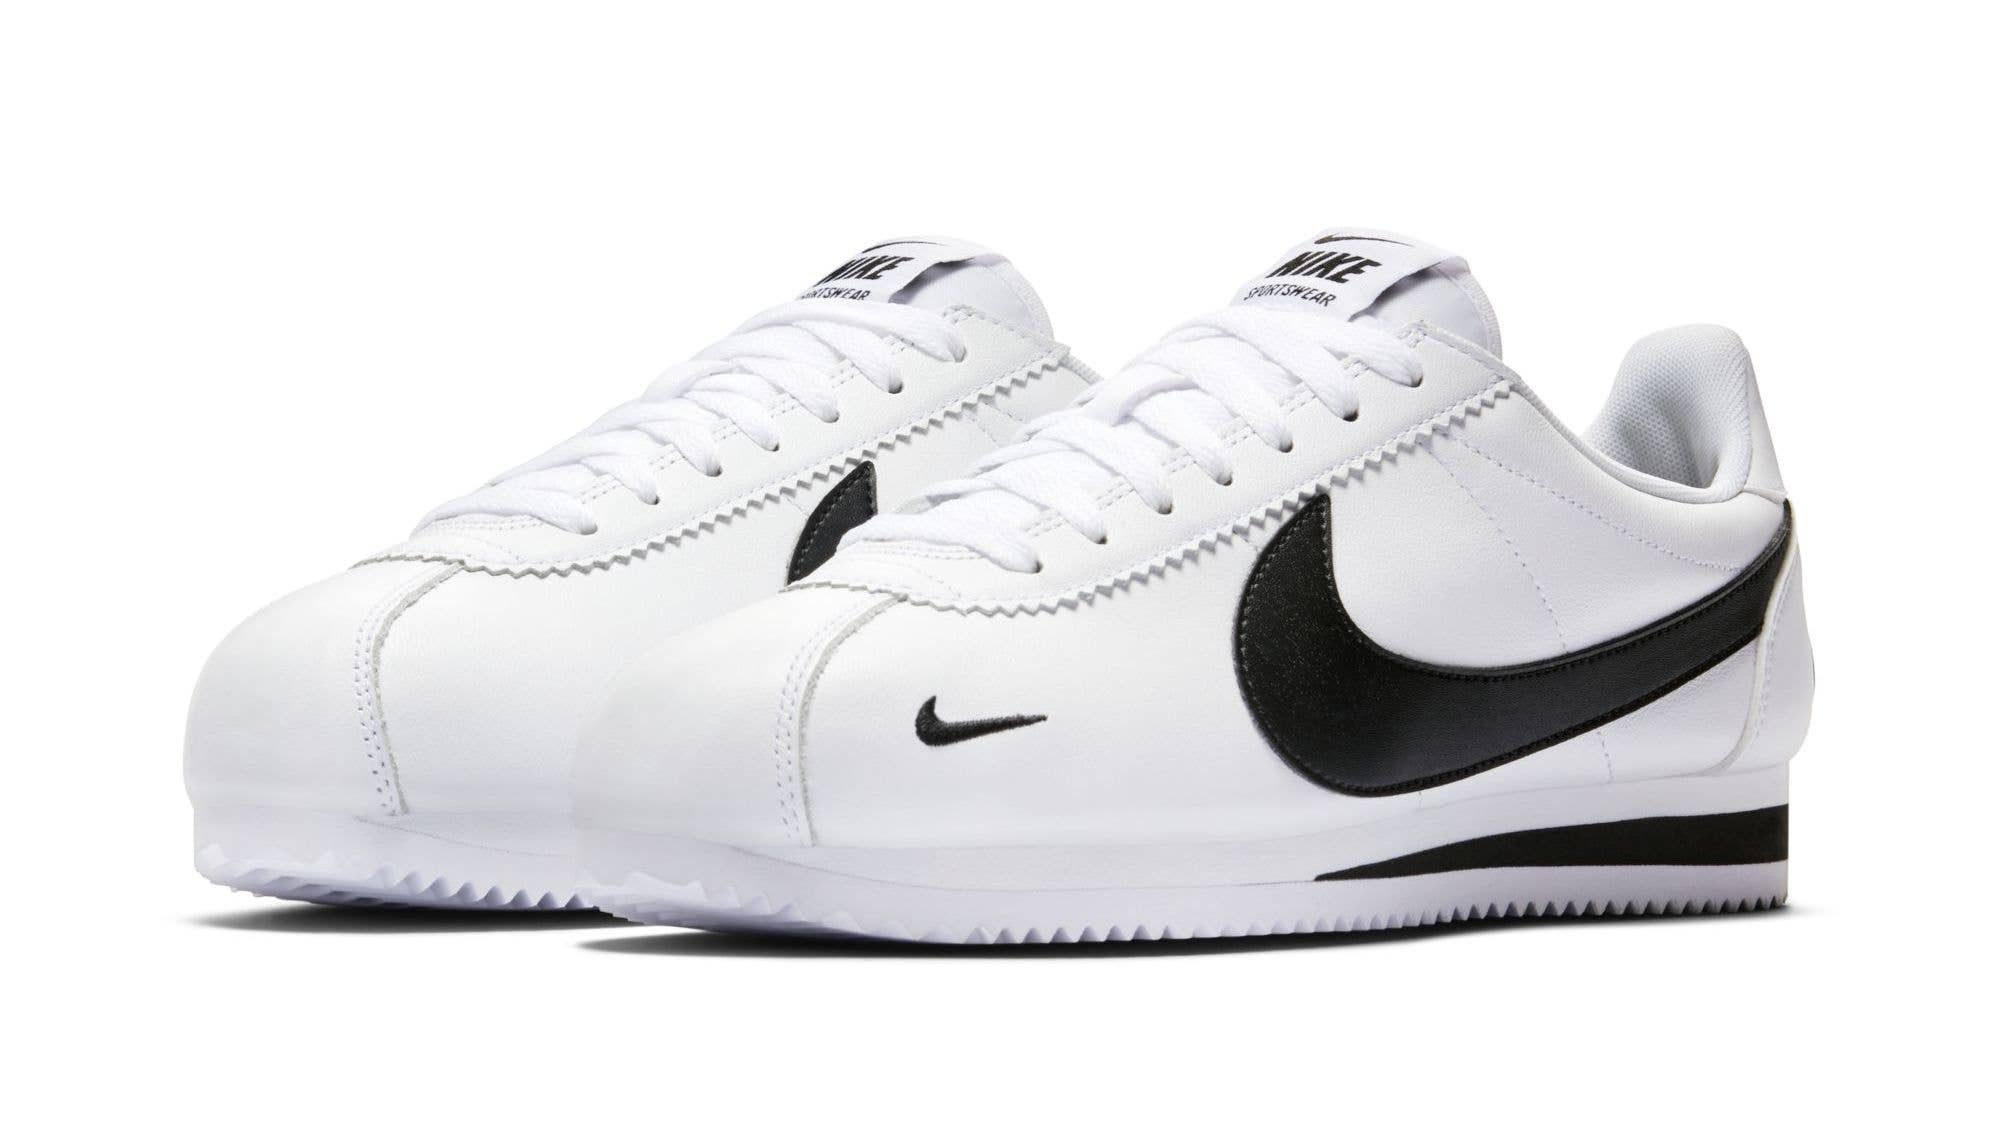 Nike Updates the Cortez With Excessive Swooshes